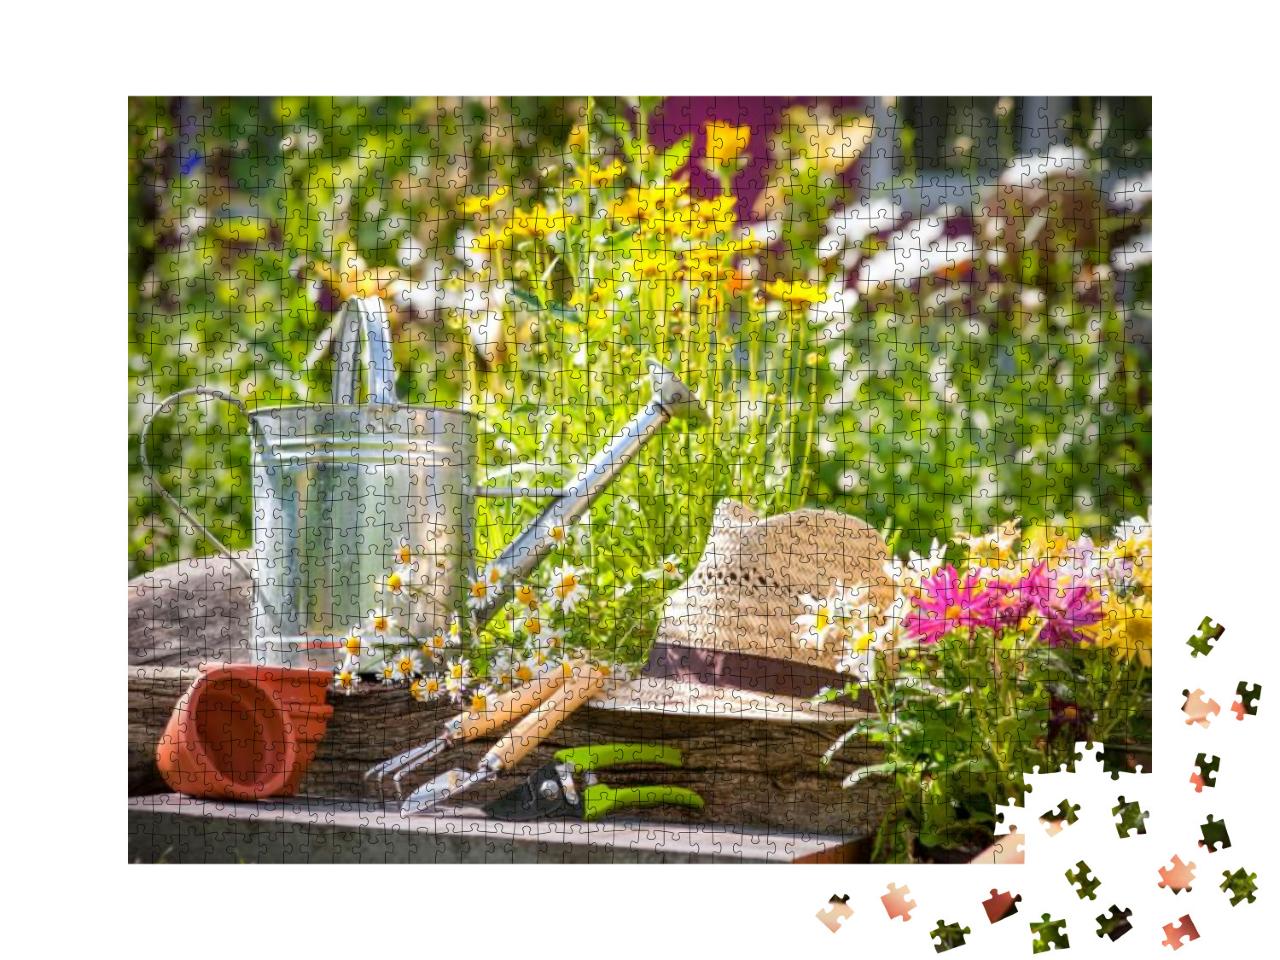 Gardening Tools & Straw Hat on the Grass in the Garden... Jigsaw Puzzle with 1000 pieces